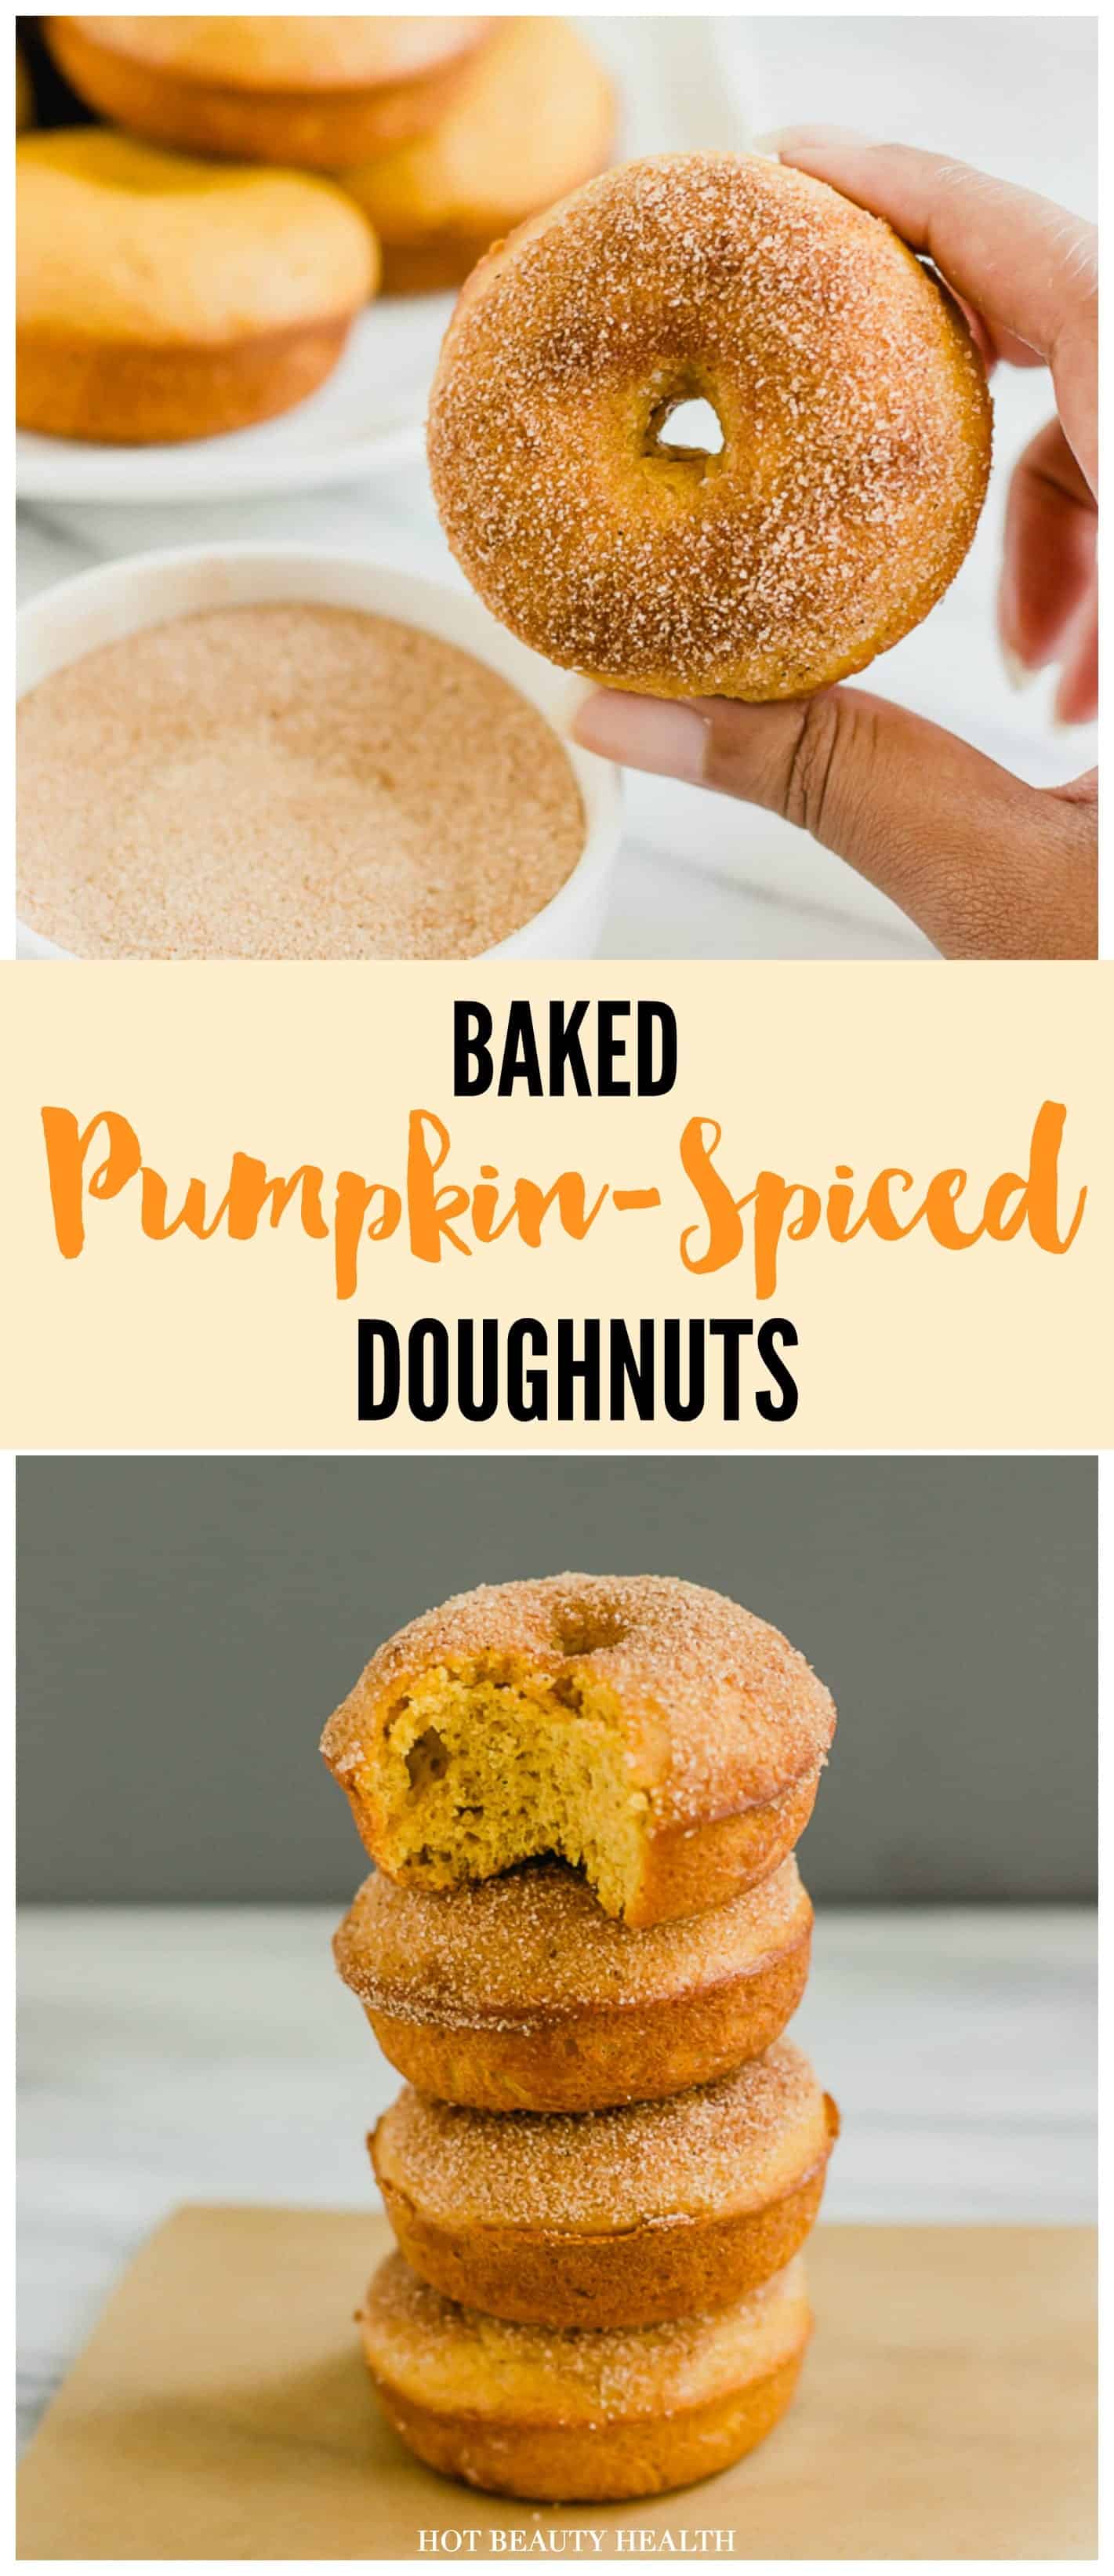 Baked Spiced Pumpkin Donuts -- quick and easy recipe that's so light and full of flavor! Perfect for a cozy fall morning or pair with ice cream for a night time dessert.